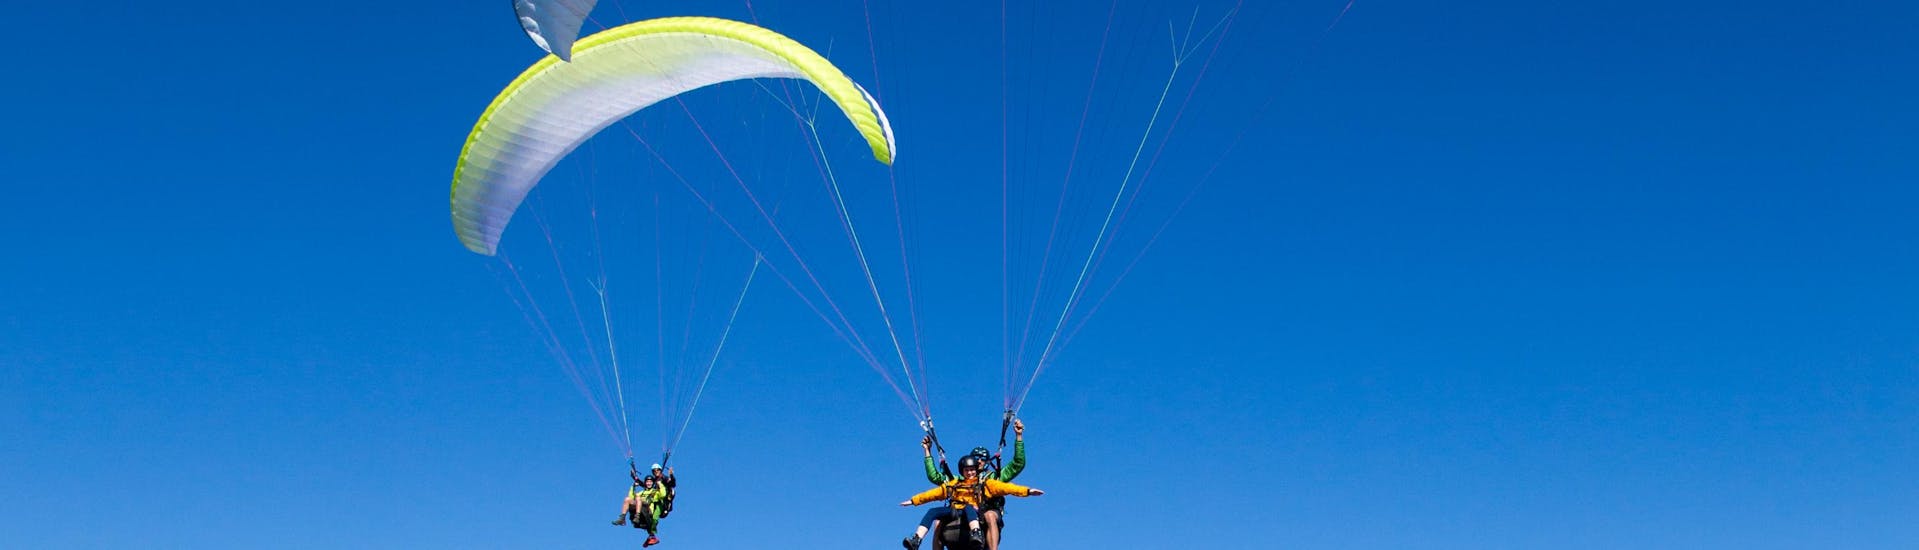 Guide and participant are in the air during tandem paragliding from the Bischling in Werfenweng - Premium with FlyTandem Salzburg.